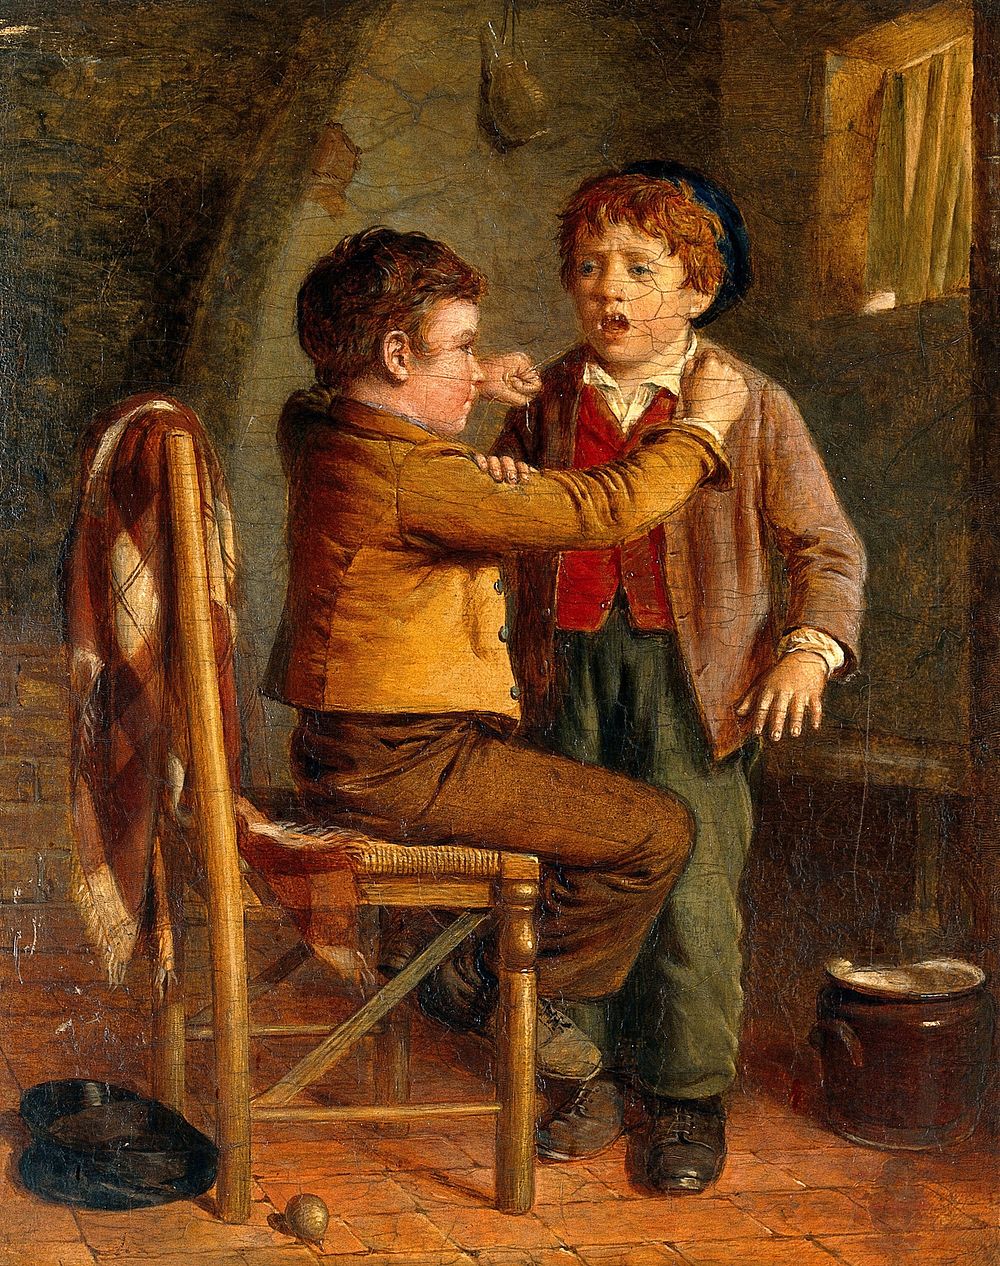 The young dentist. Oil painting by William Hemsley.